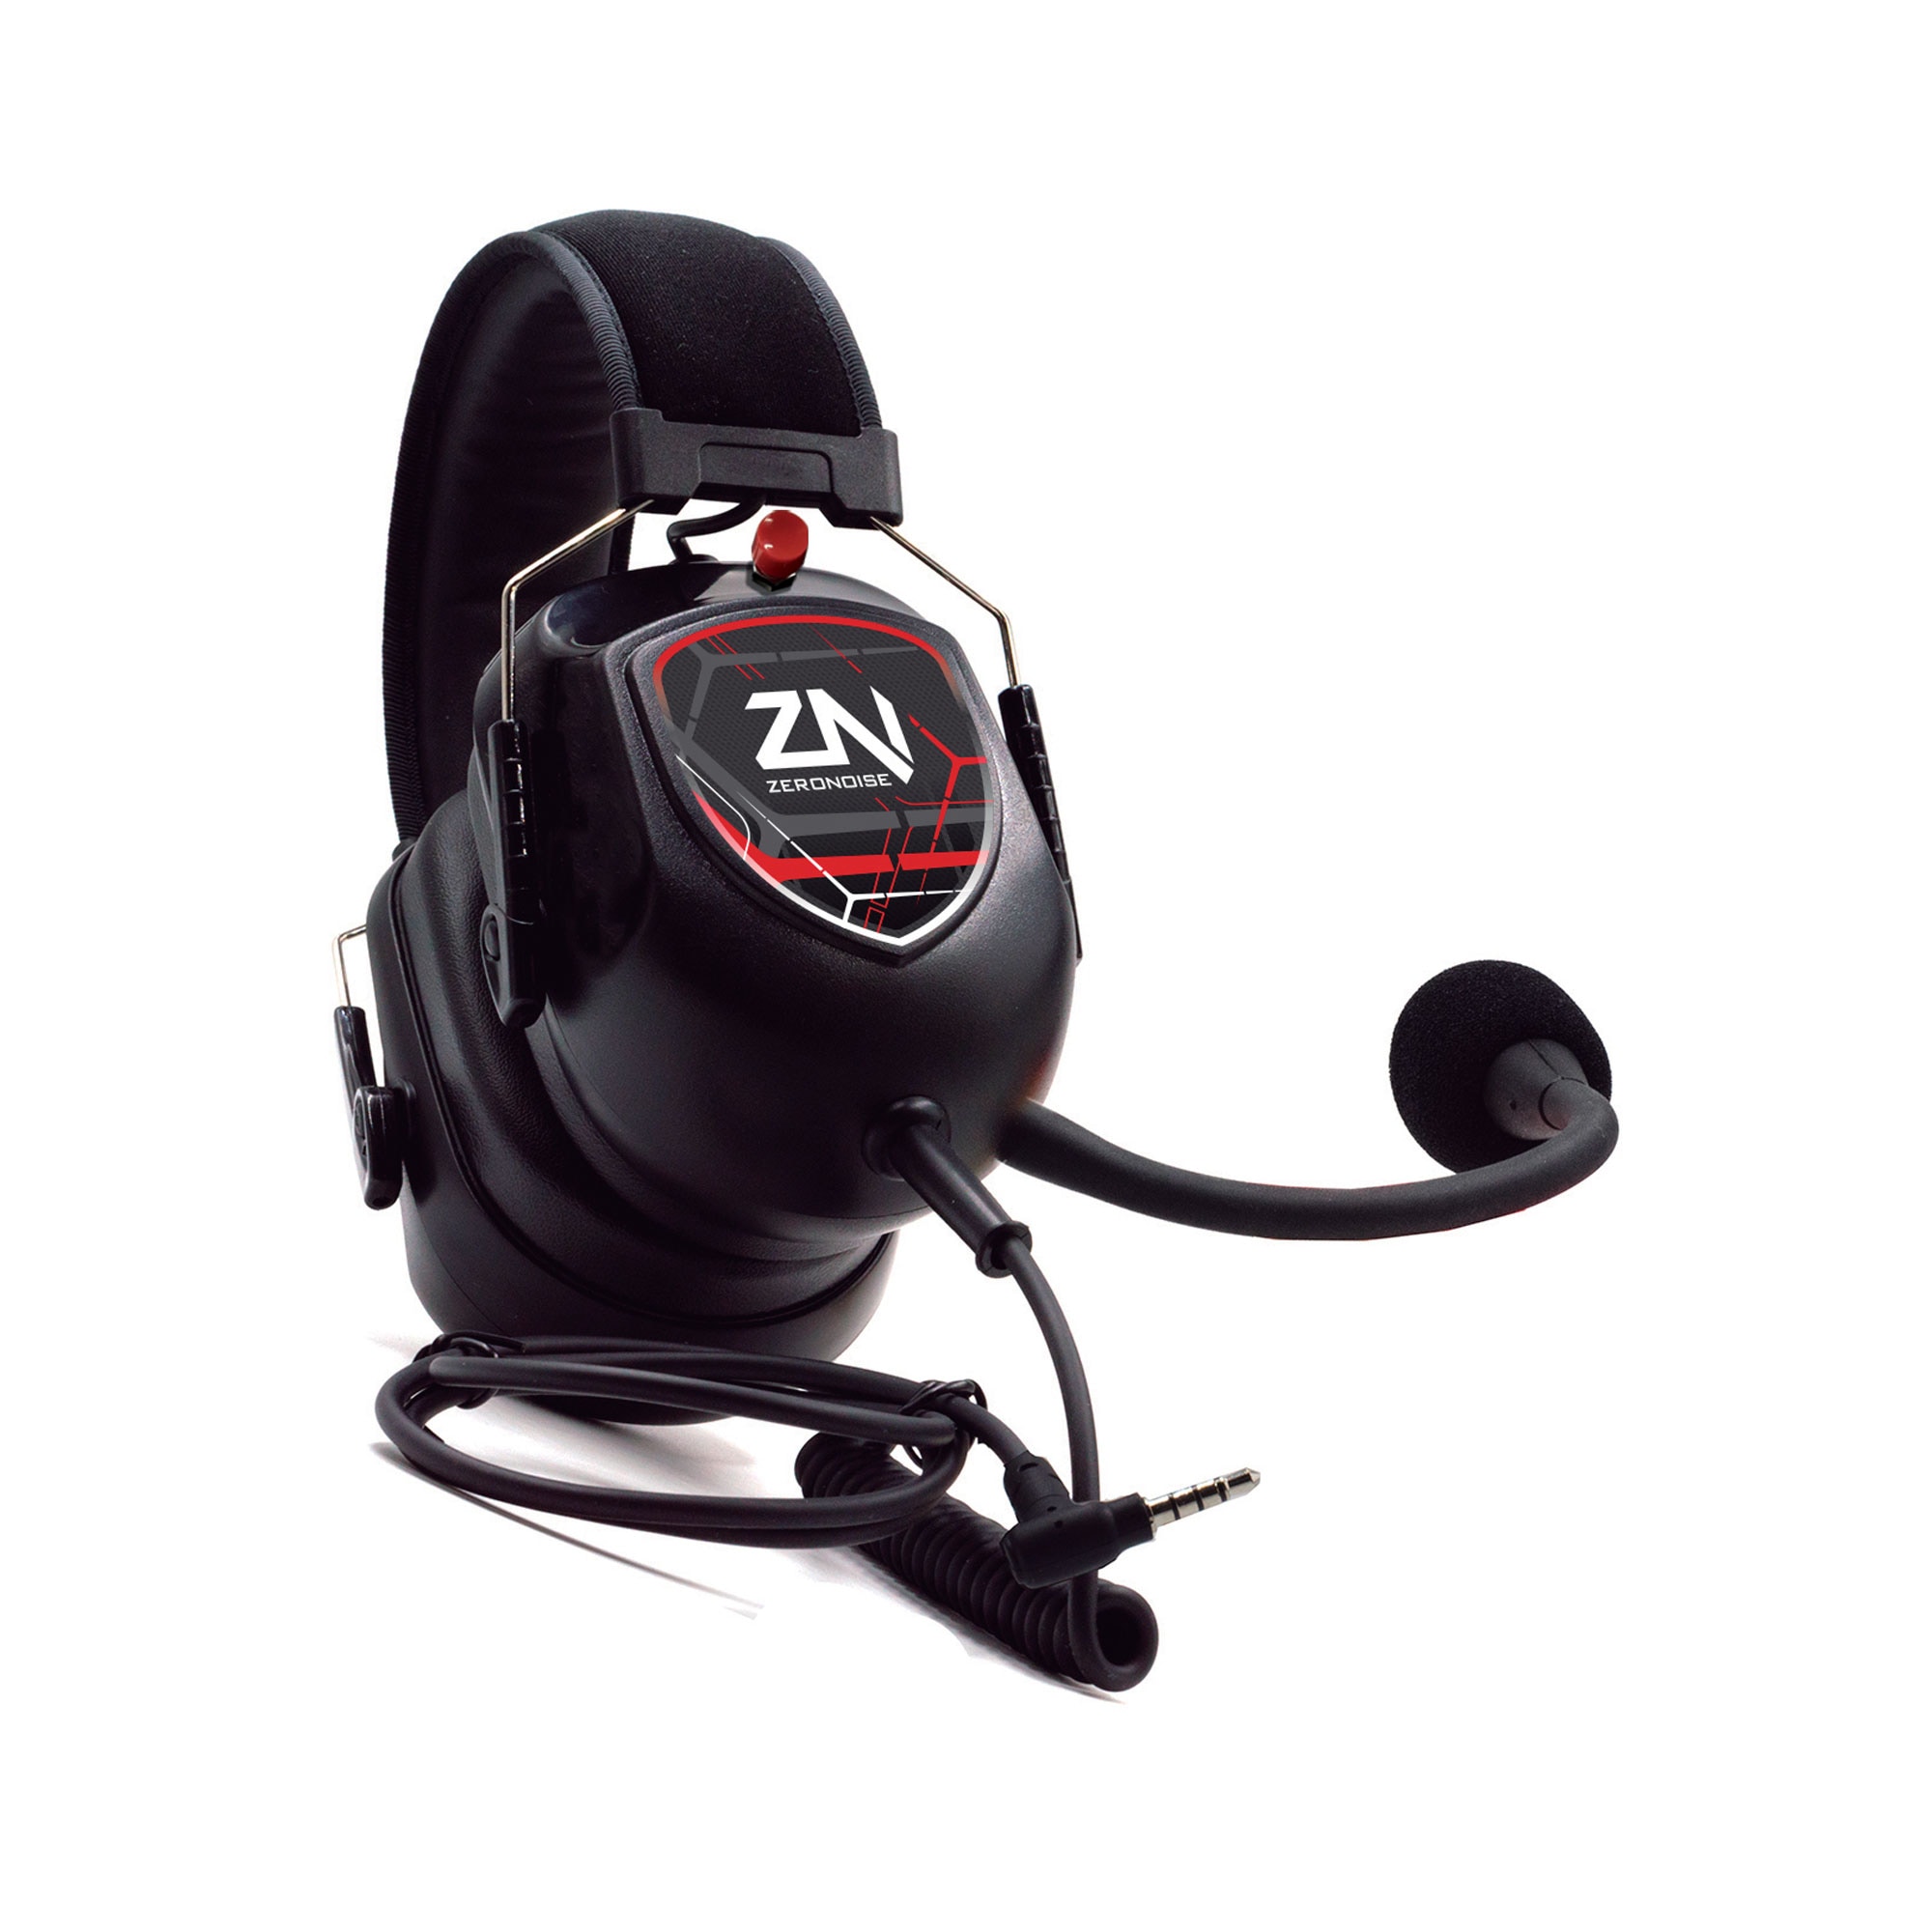 Pit Link Trainer ZN Professionel Karting Interom System (IPhone)